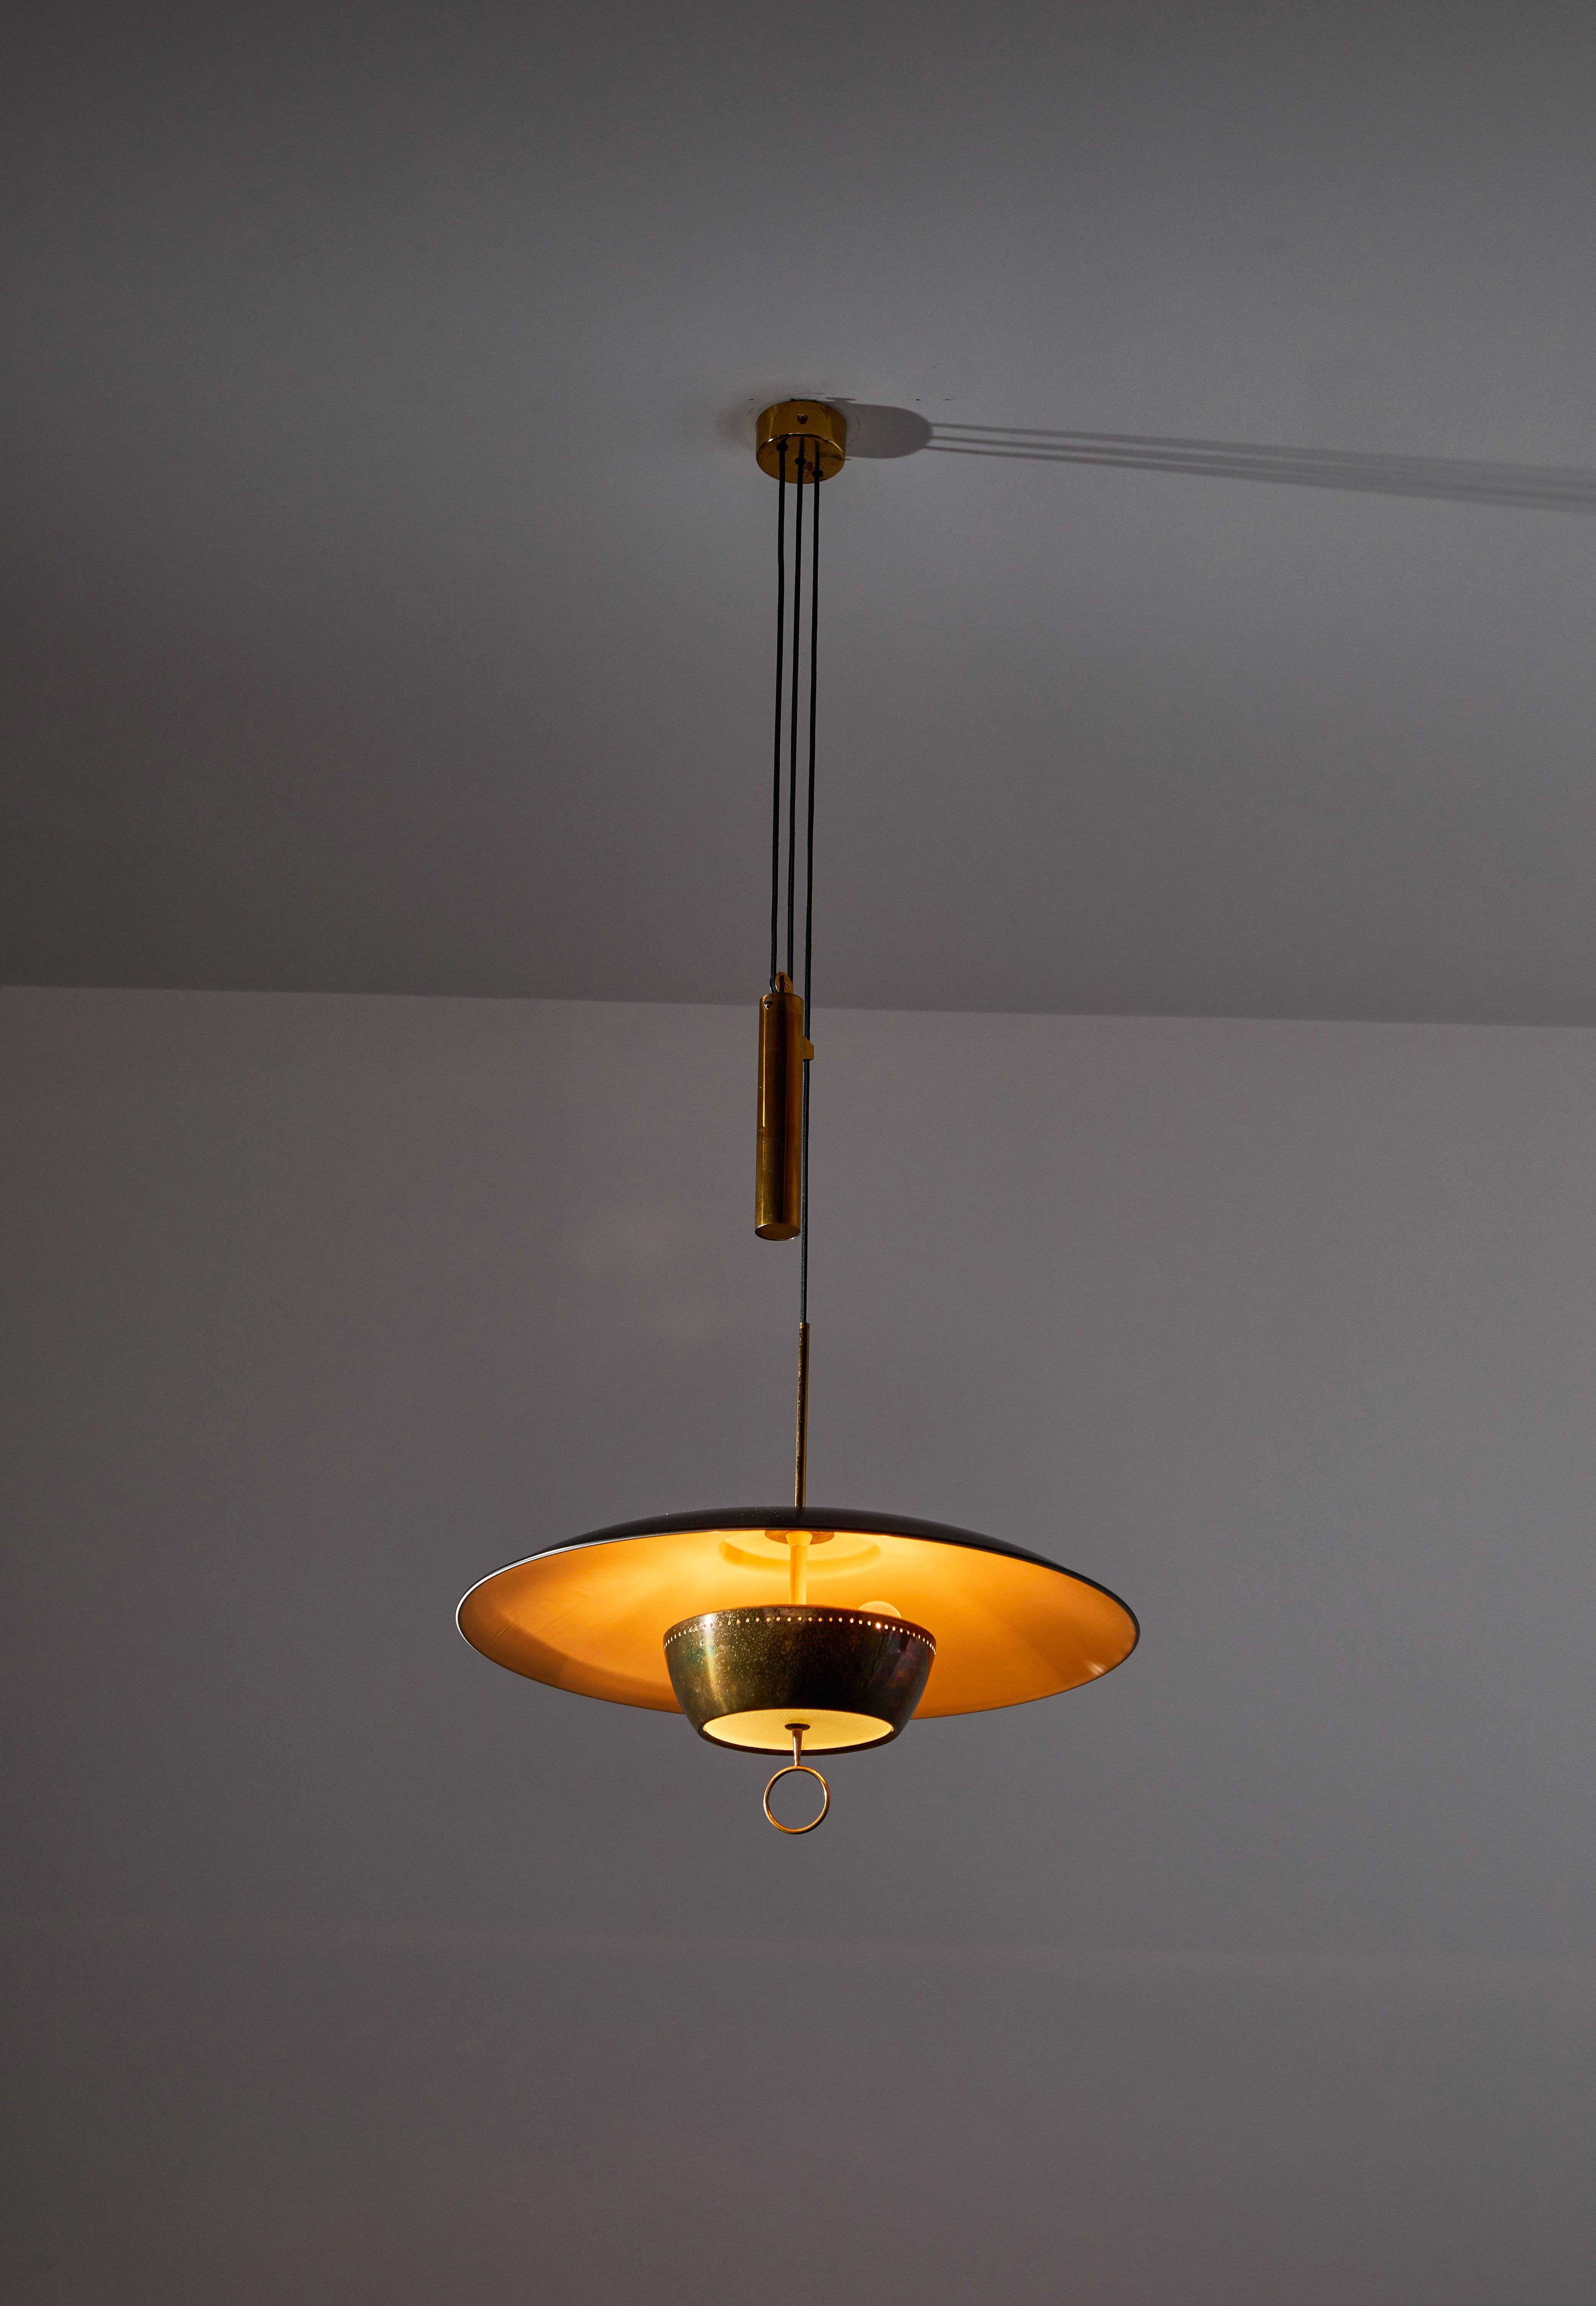 Pulley pendant by Gaetano Sciolari for Stilnovo. Made in Italy, circa 1950s. Enameled metal shade, glass diffuser, solid brass pulley which adjust height from 60